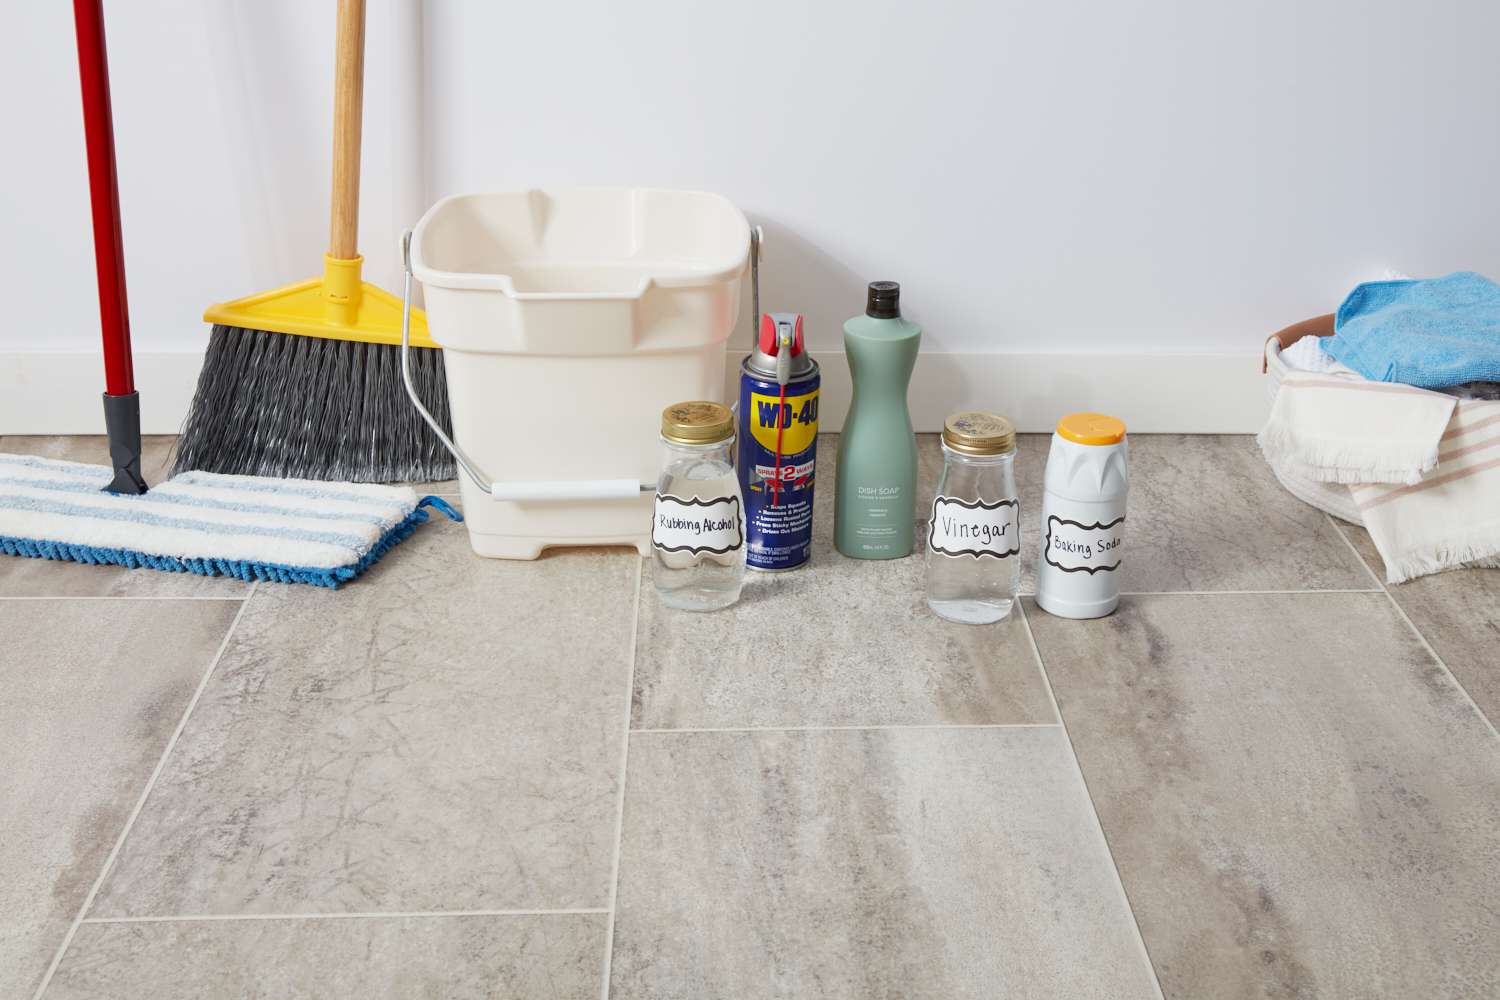 How To Clean Tile Floor At Your Home, How To Mop A Vinyl Floor